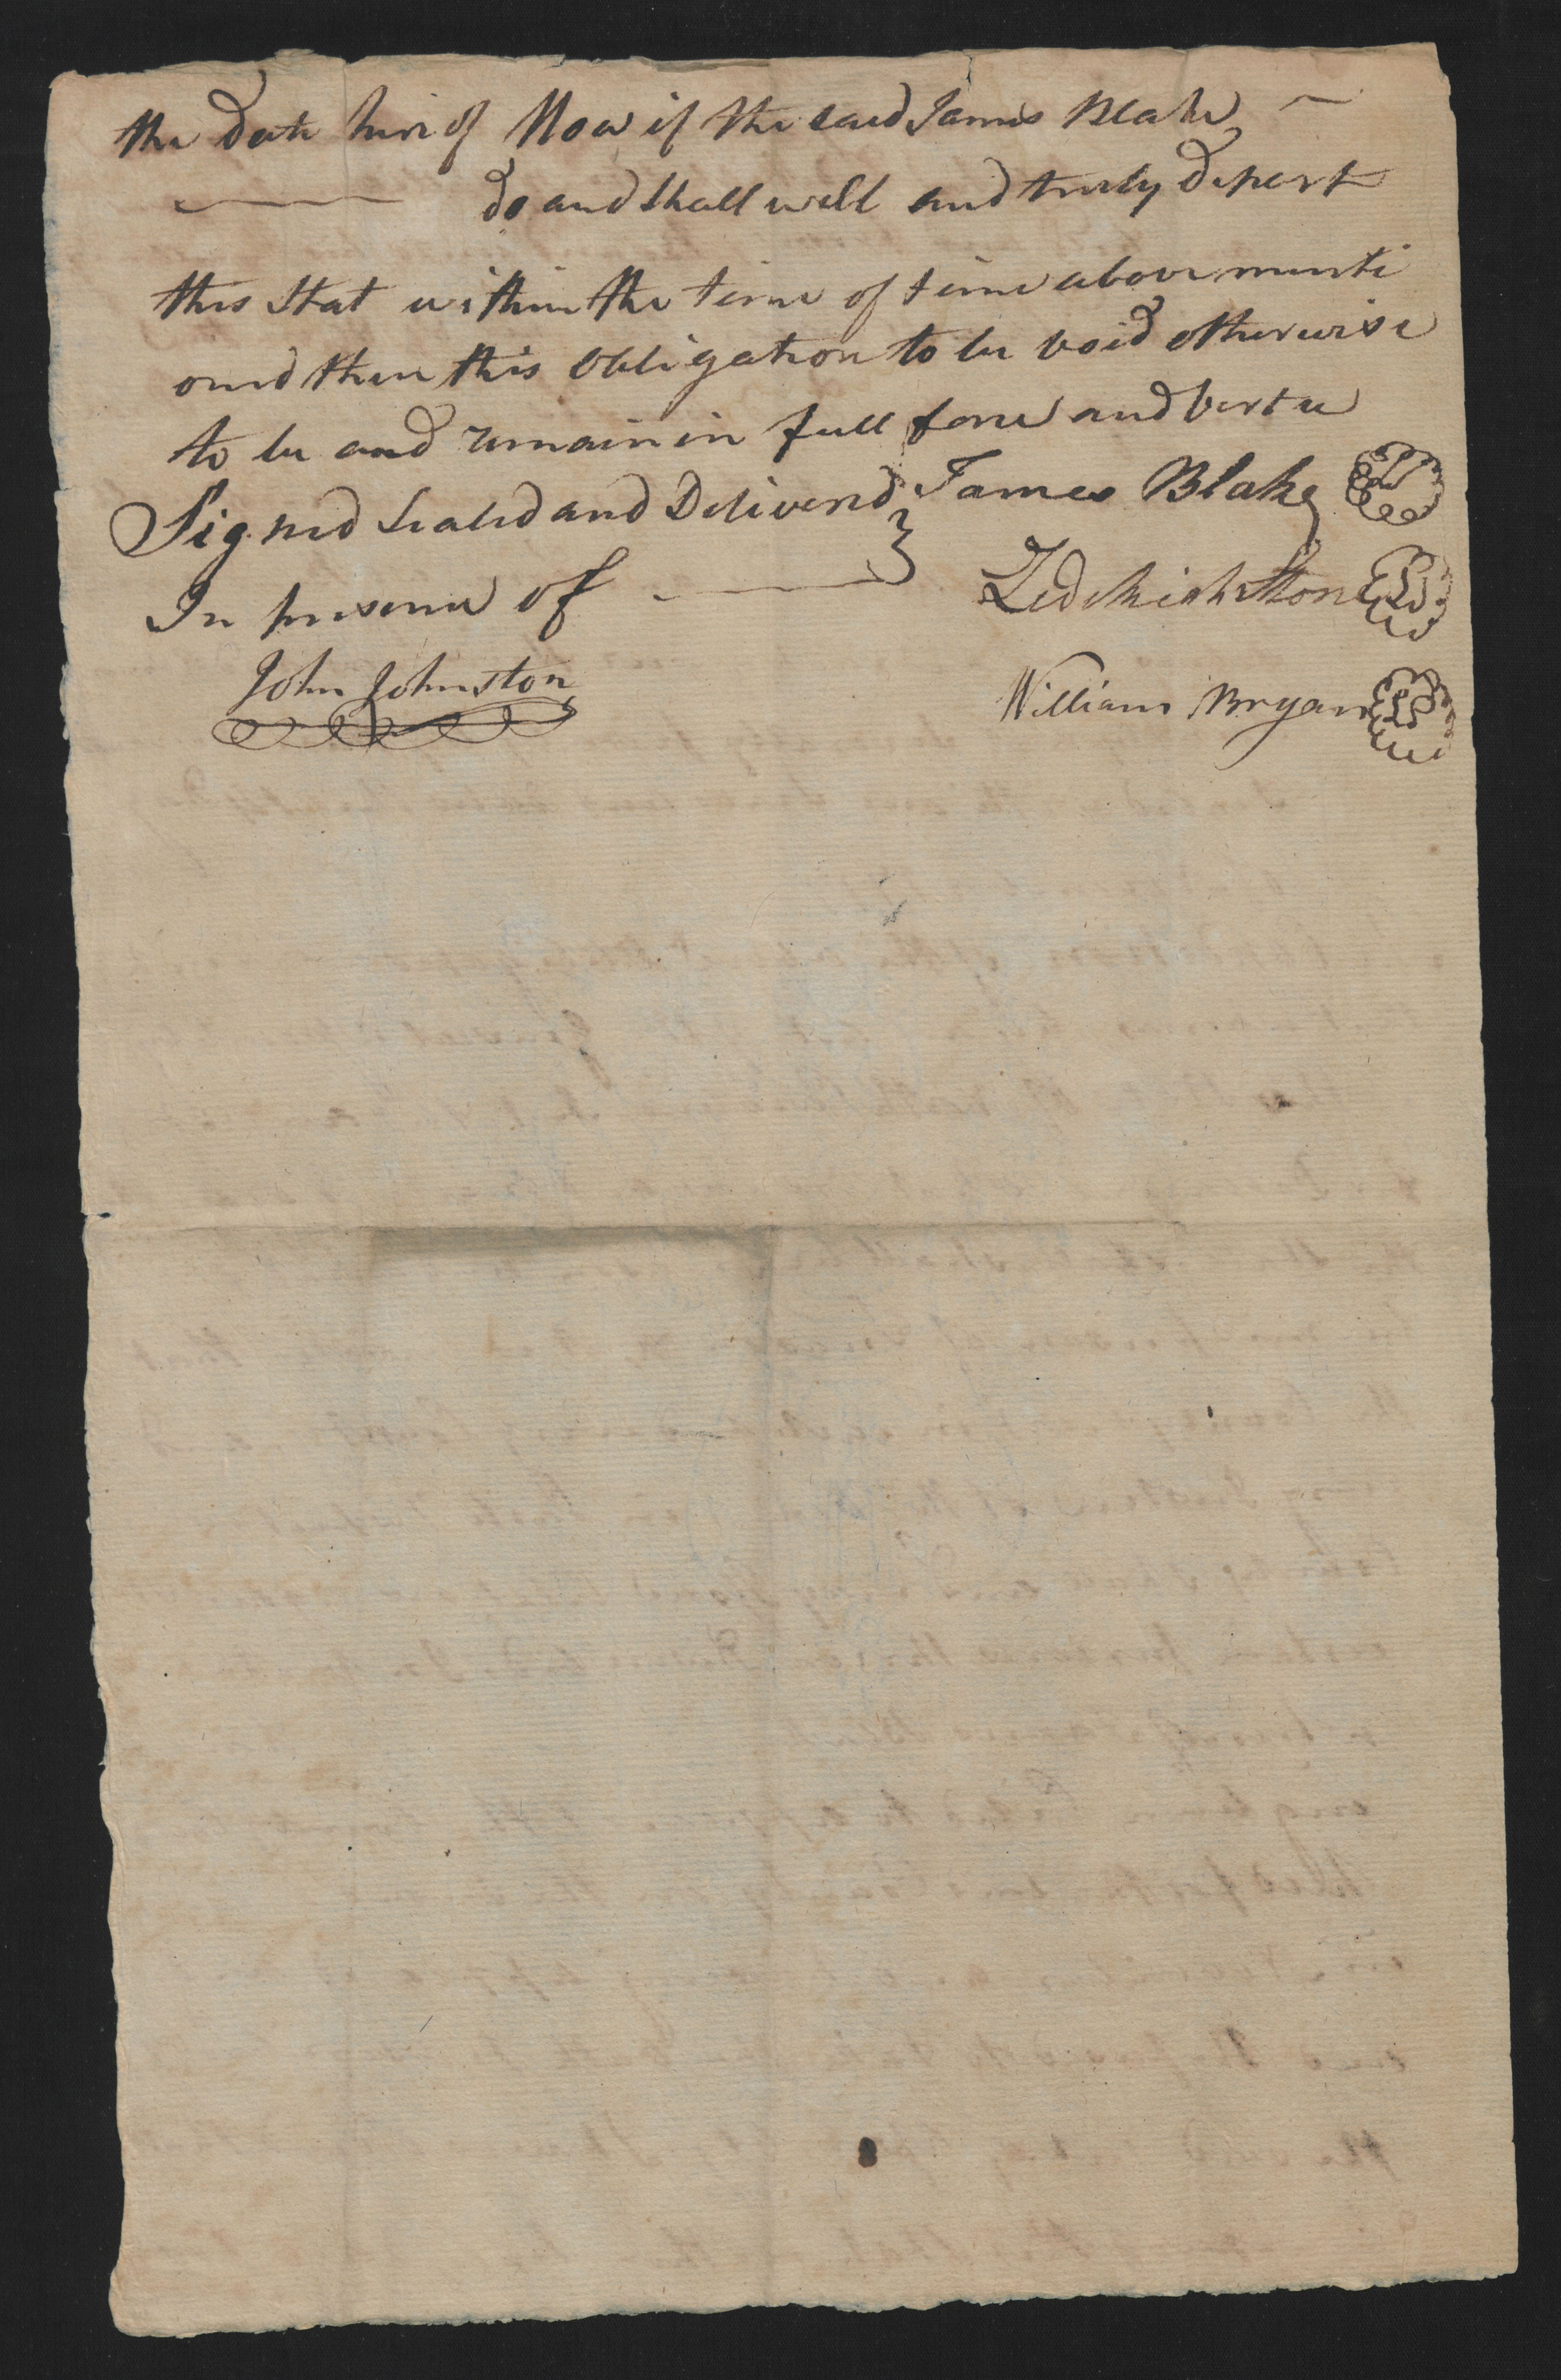 Bond from the Bertie County Court for James Blake, 14 November 1777, page 2